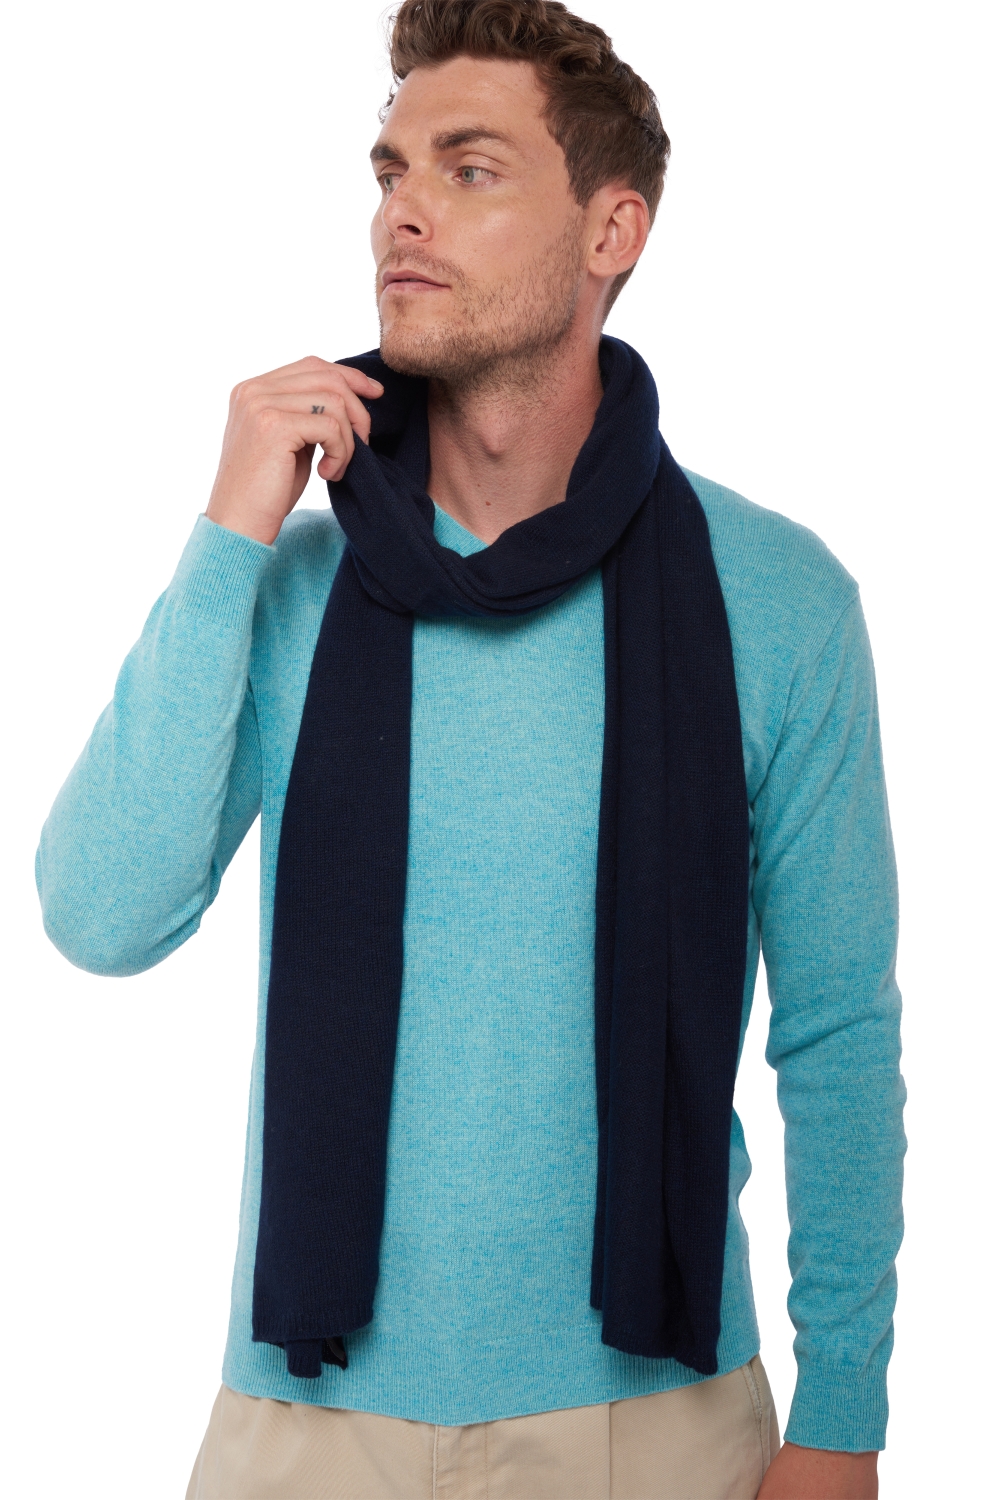 Cachemire pull homme miaou marine fonce 210 x 38 cm